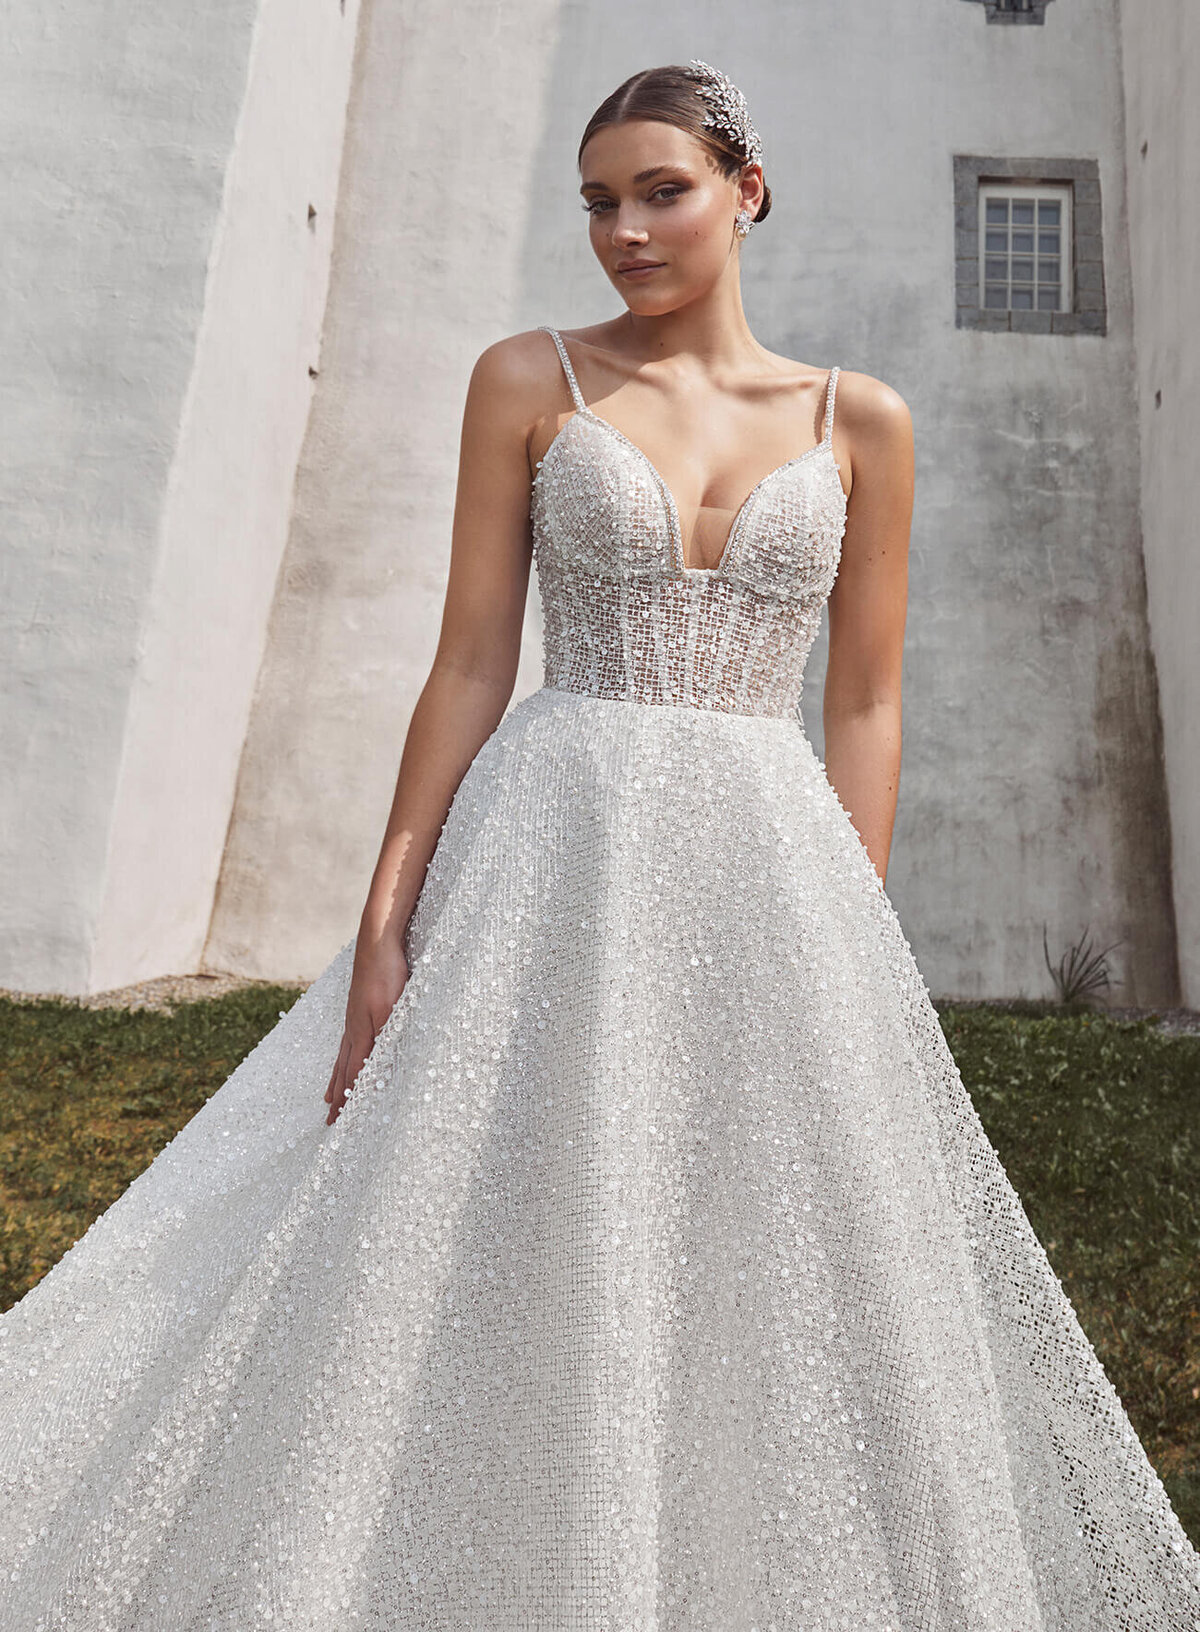 uploads_1700065425546-124101-Philipa-Sparkly-A-Line-Wedding-Dress-with-Beaded-Lace-and-Sweetheart-Neckline-2